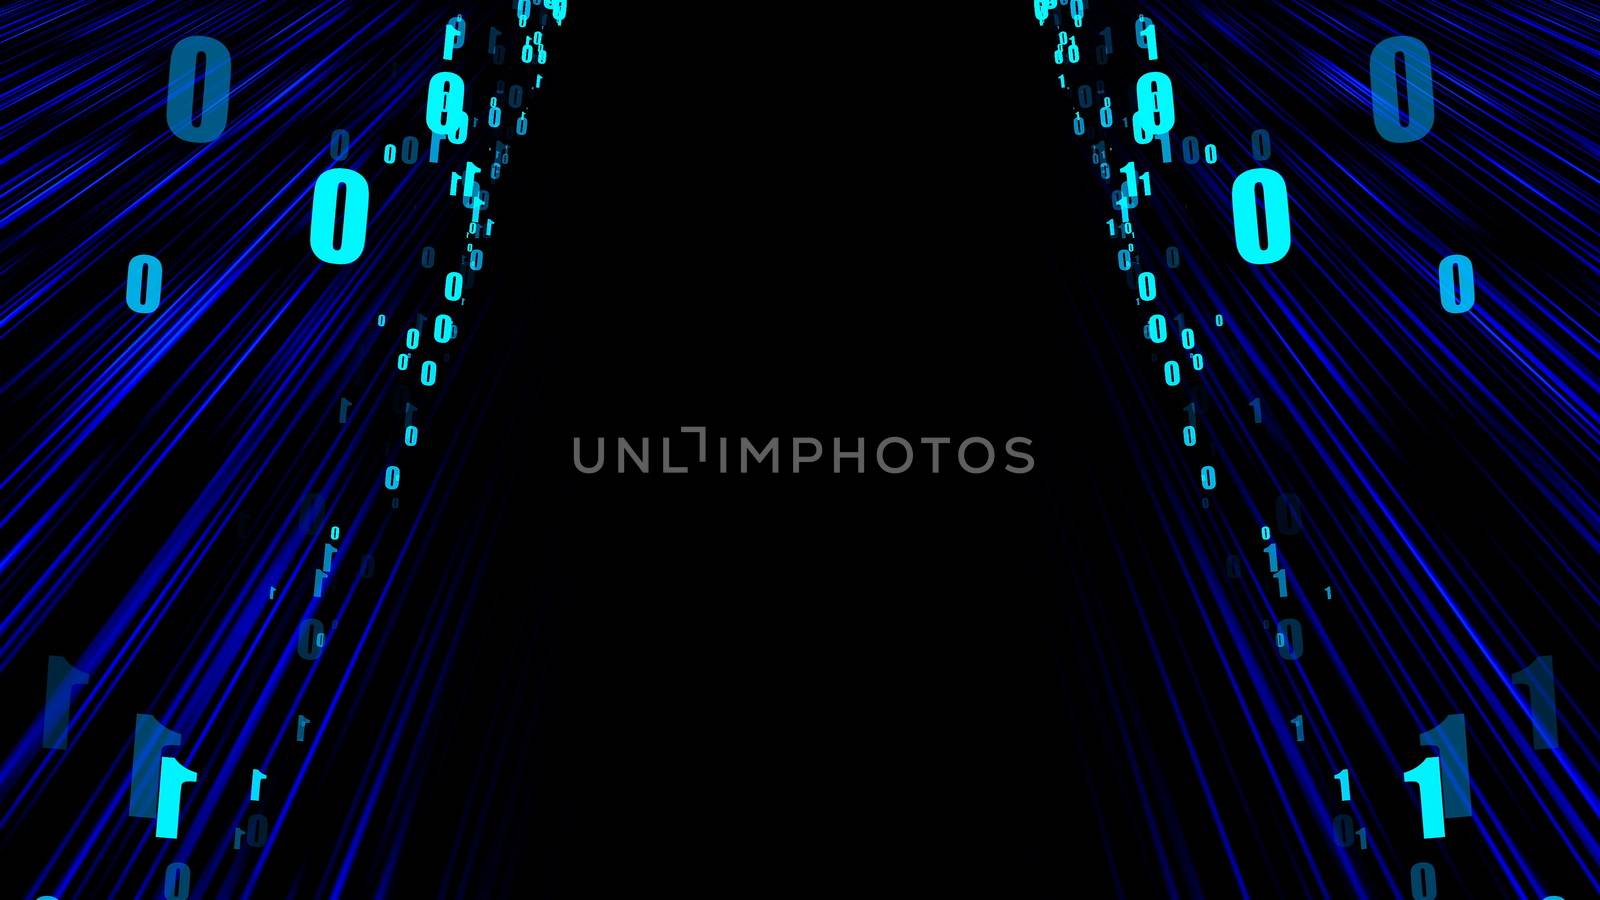 Network stream data - fast motion in space with zeros and ones, computer generated modern abstract background, 3d rendering